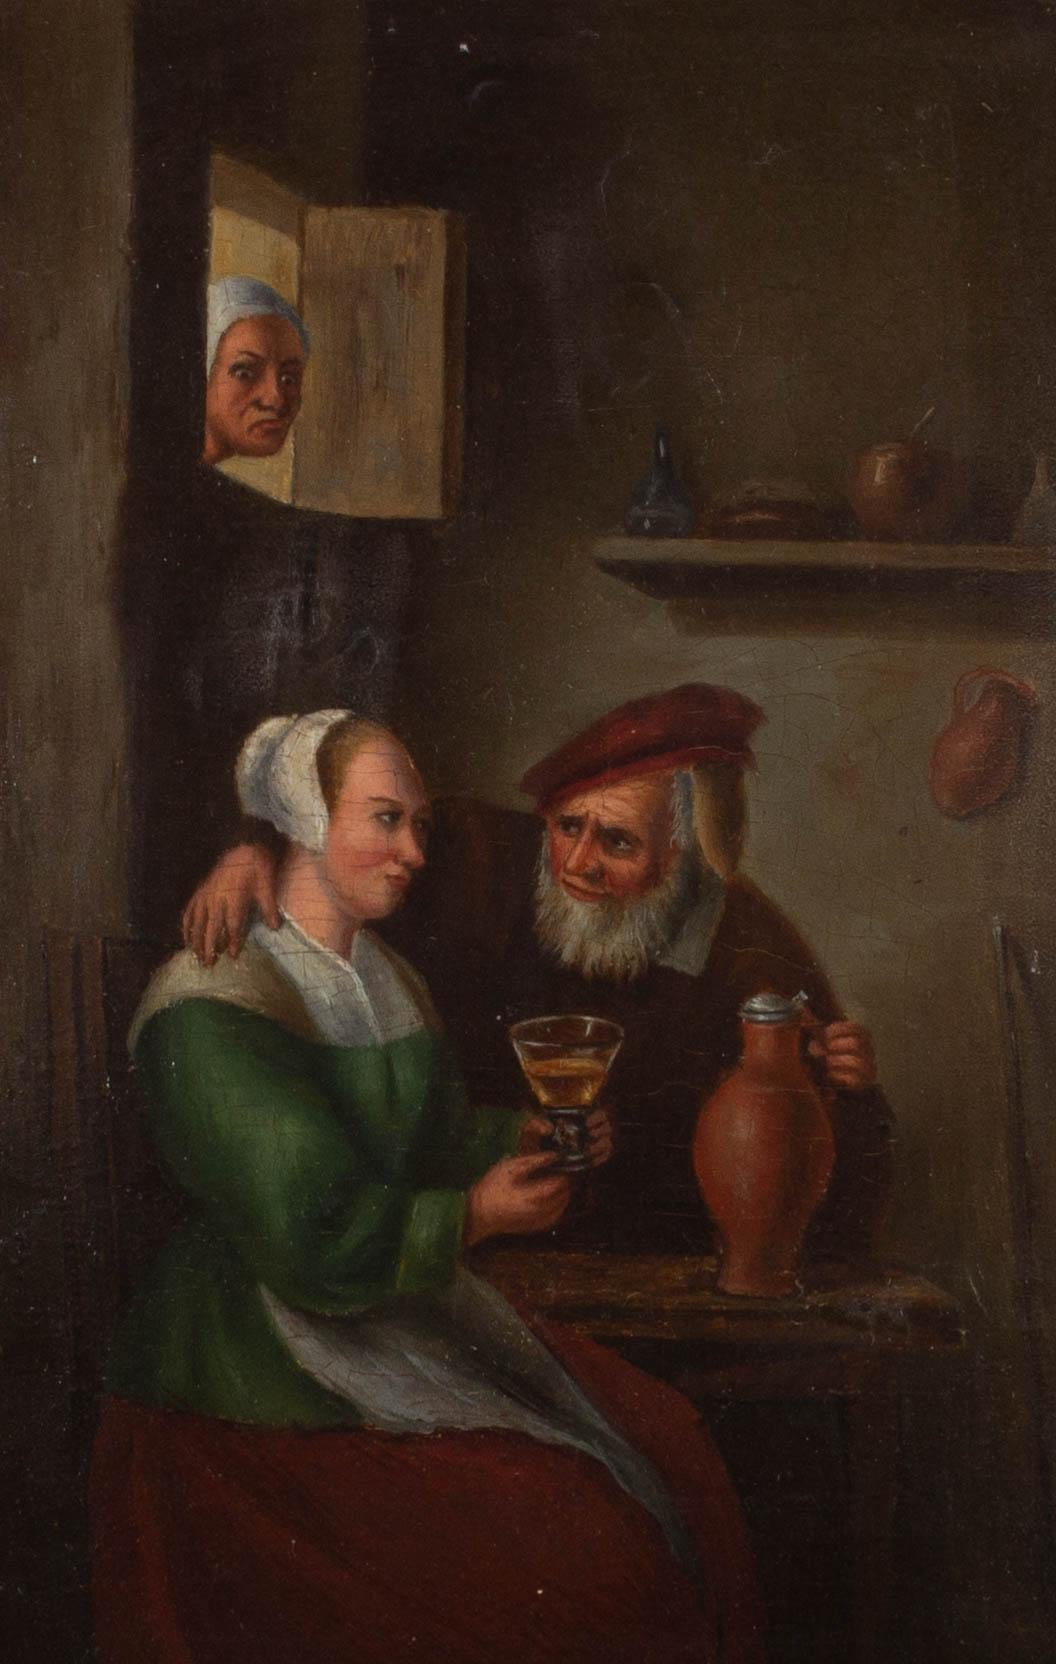 An interior scene in a tavern in the manner of the Dutch artist David Teniers the Younger (1610-1690), the most famous 17th-century painter of peasant life. A woman gazes with a comic rage through a window towards a man, presumably her husband,